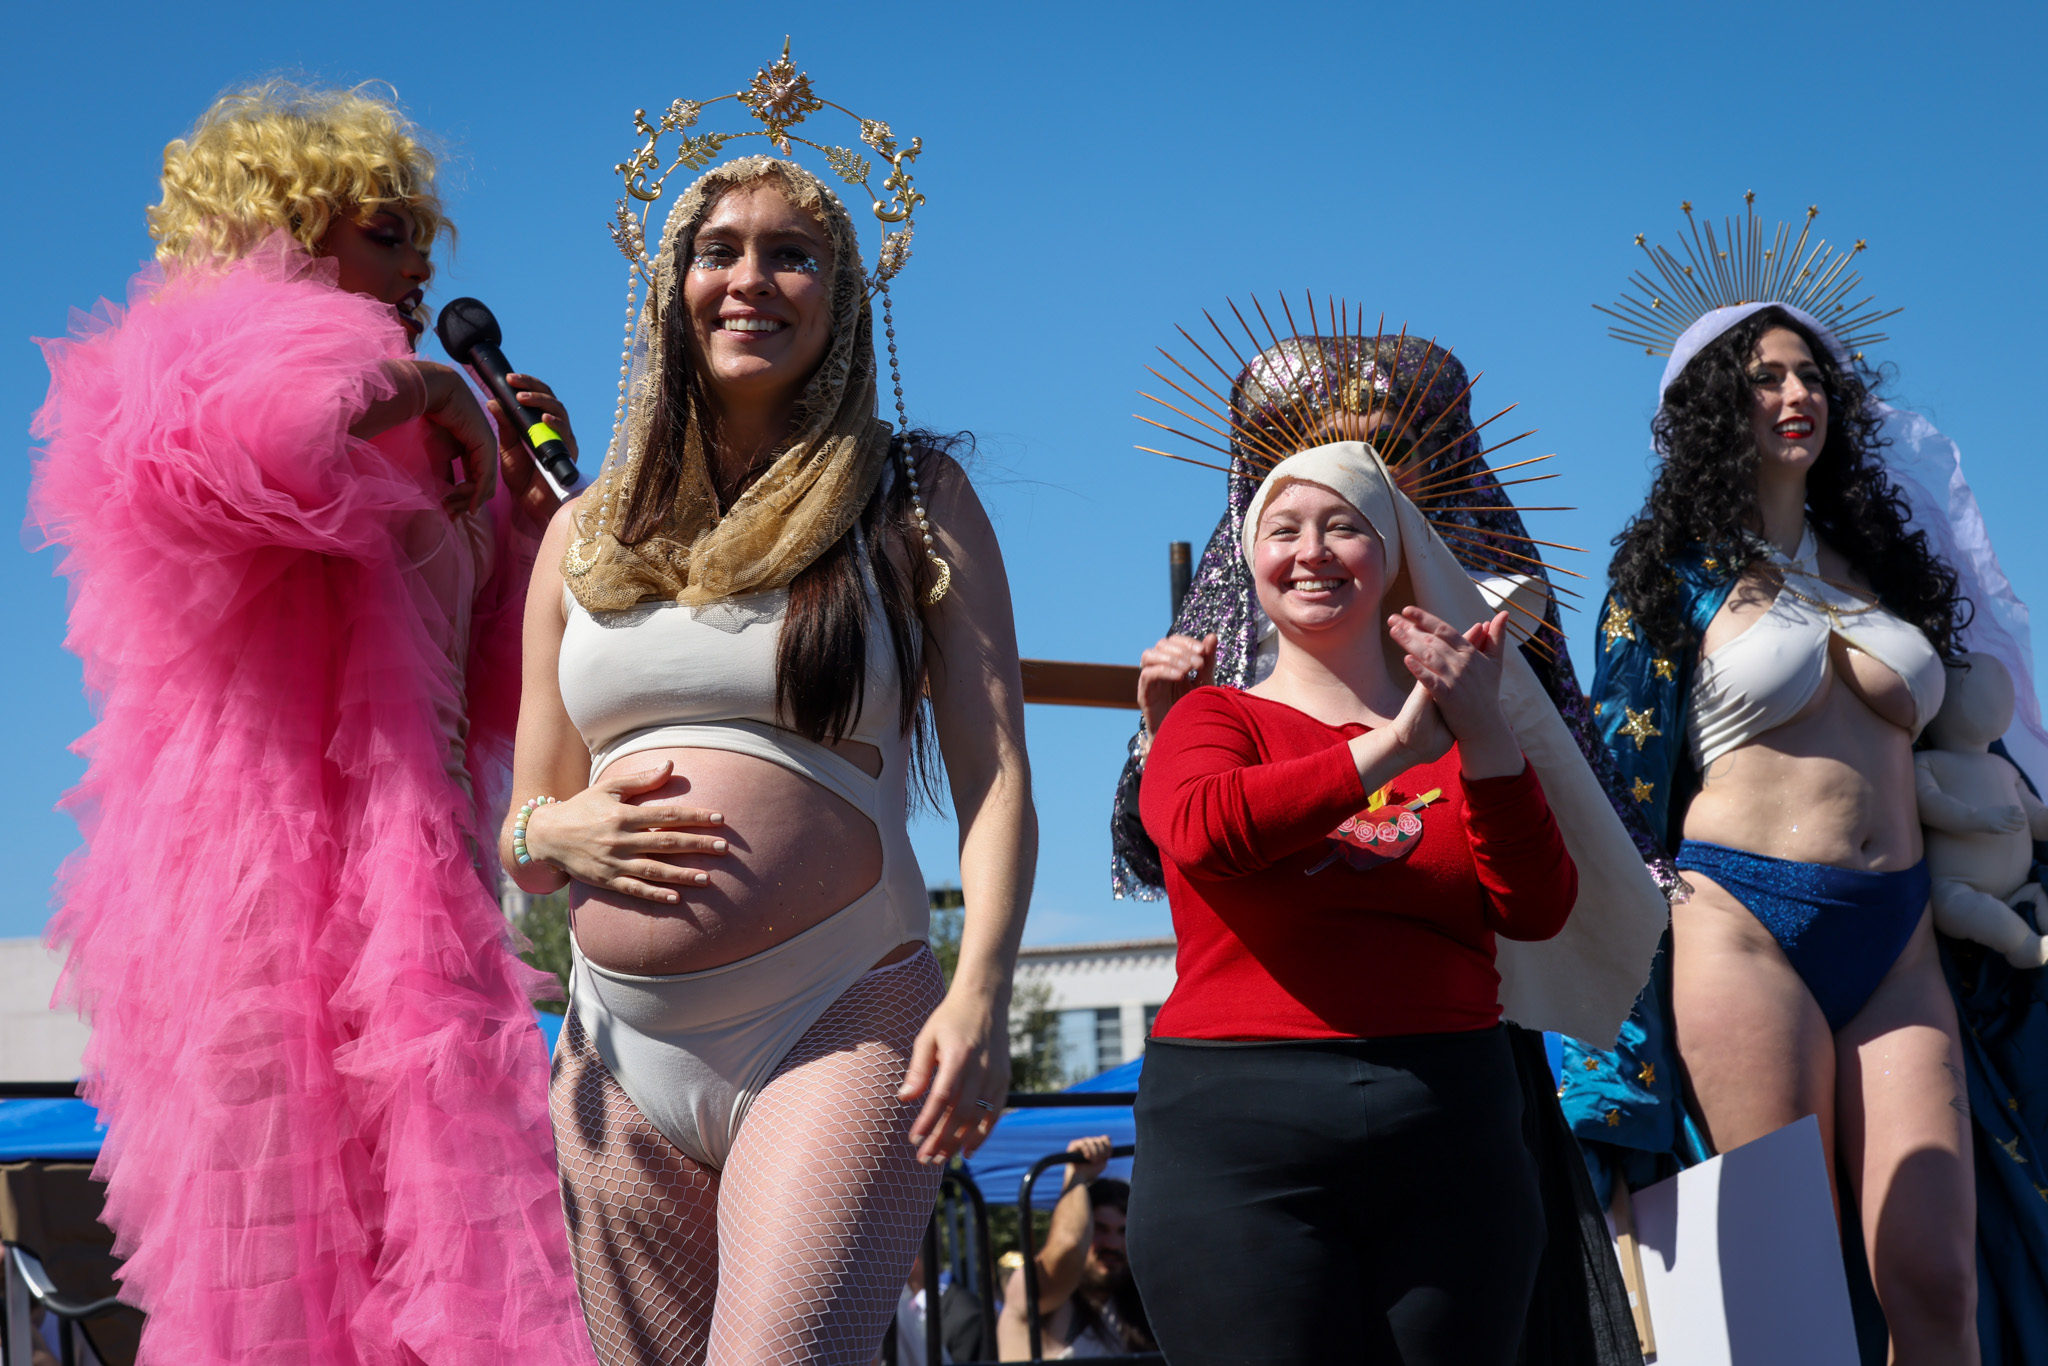 four women or femme-presenting people, one visibly pregnant, stand on a stage outdoors